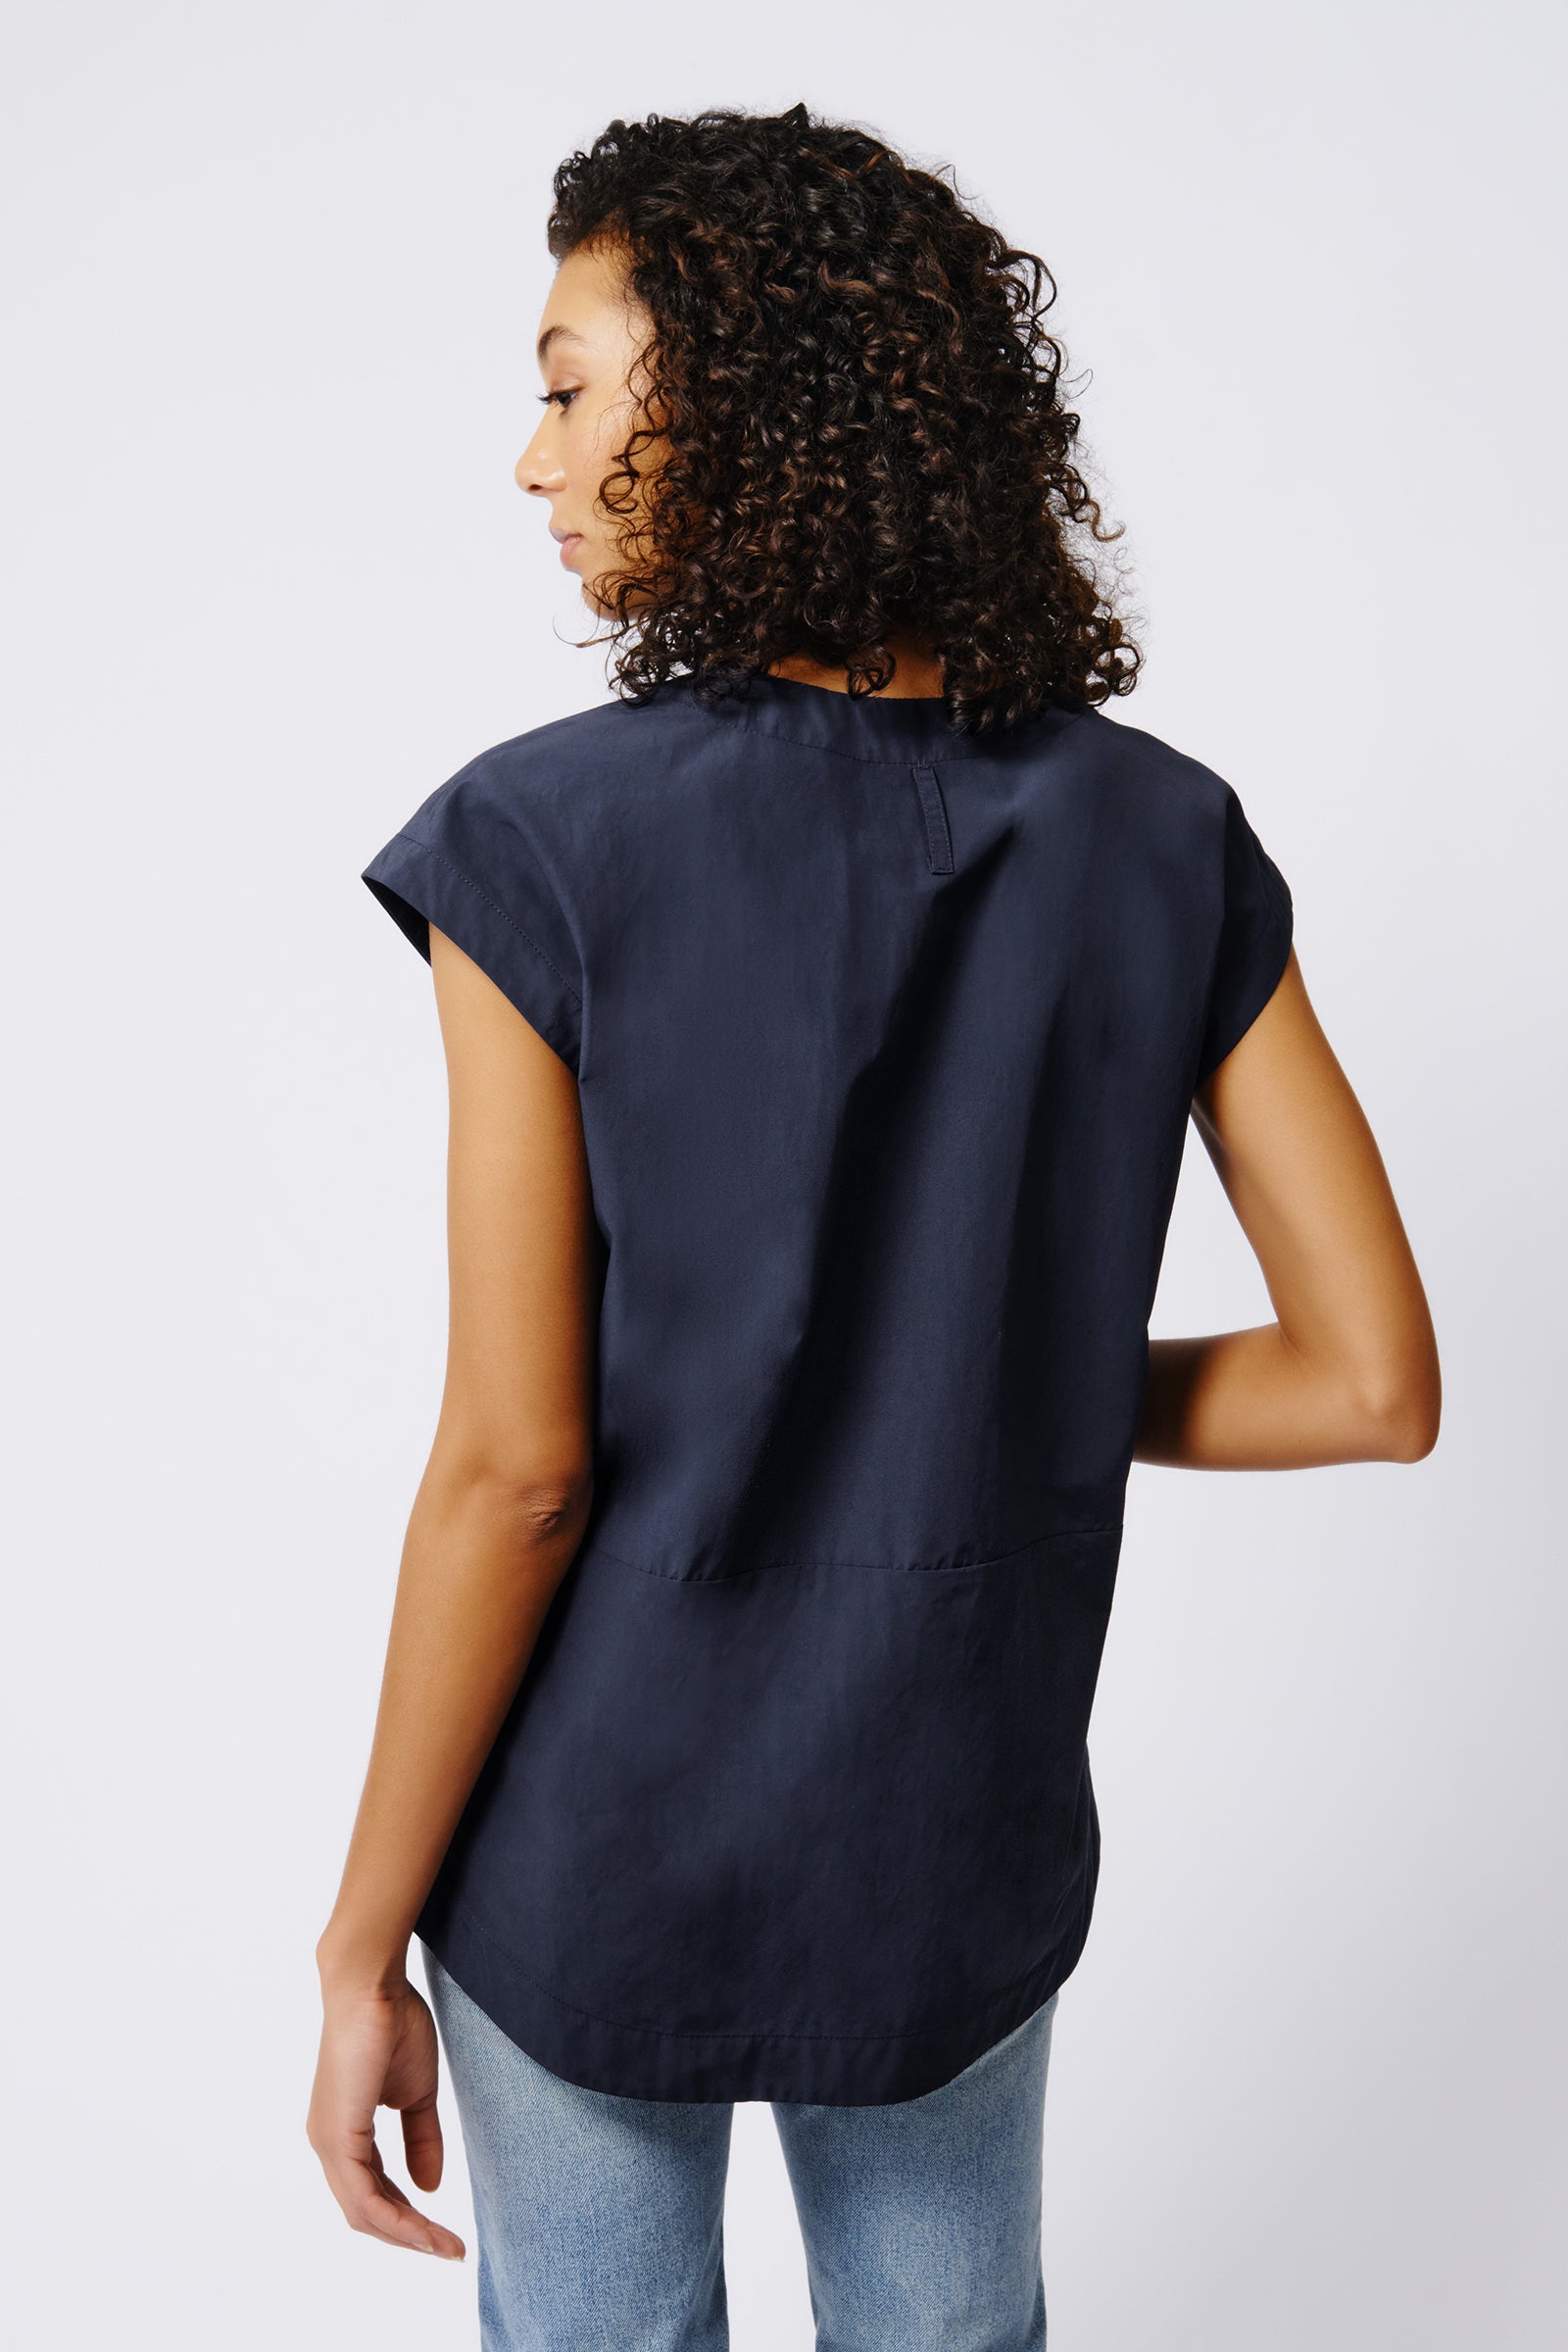 Kal Rieman Seam Pocket Tunic in Navy Broadcloth on Model Front View Crop